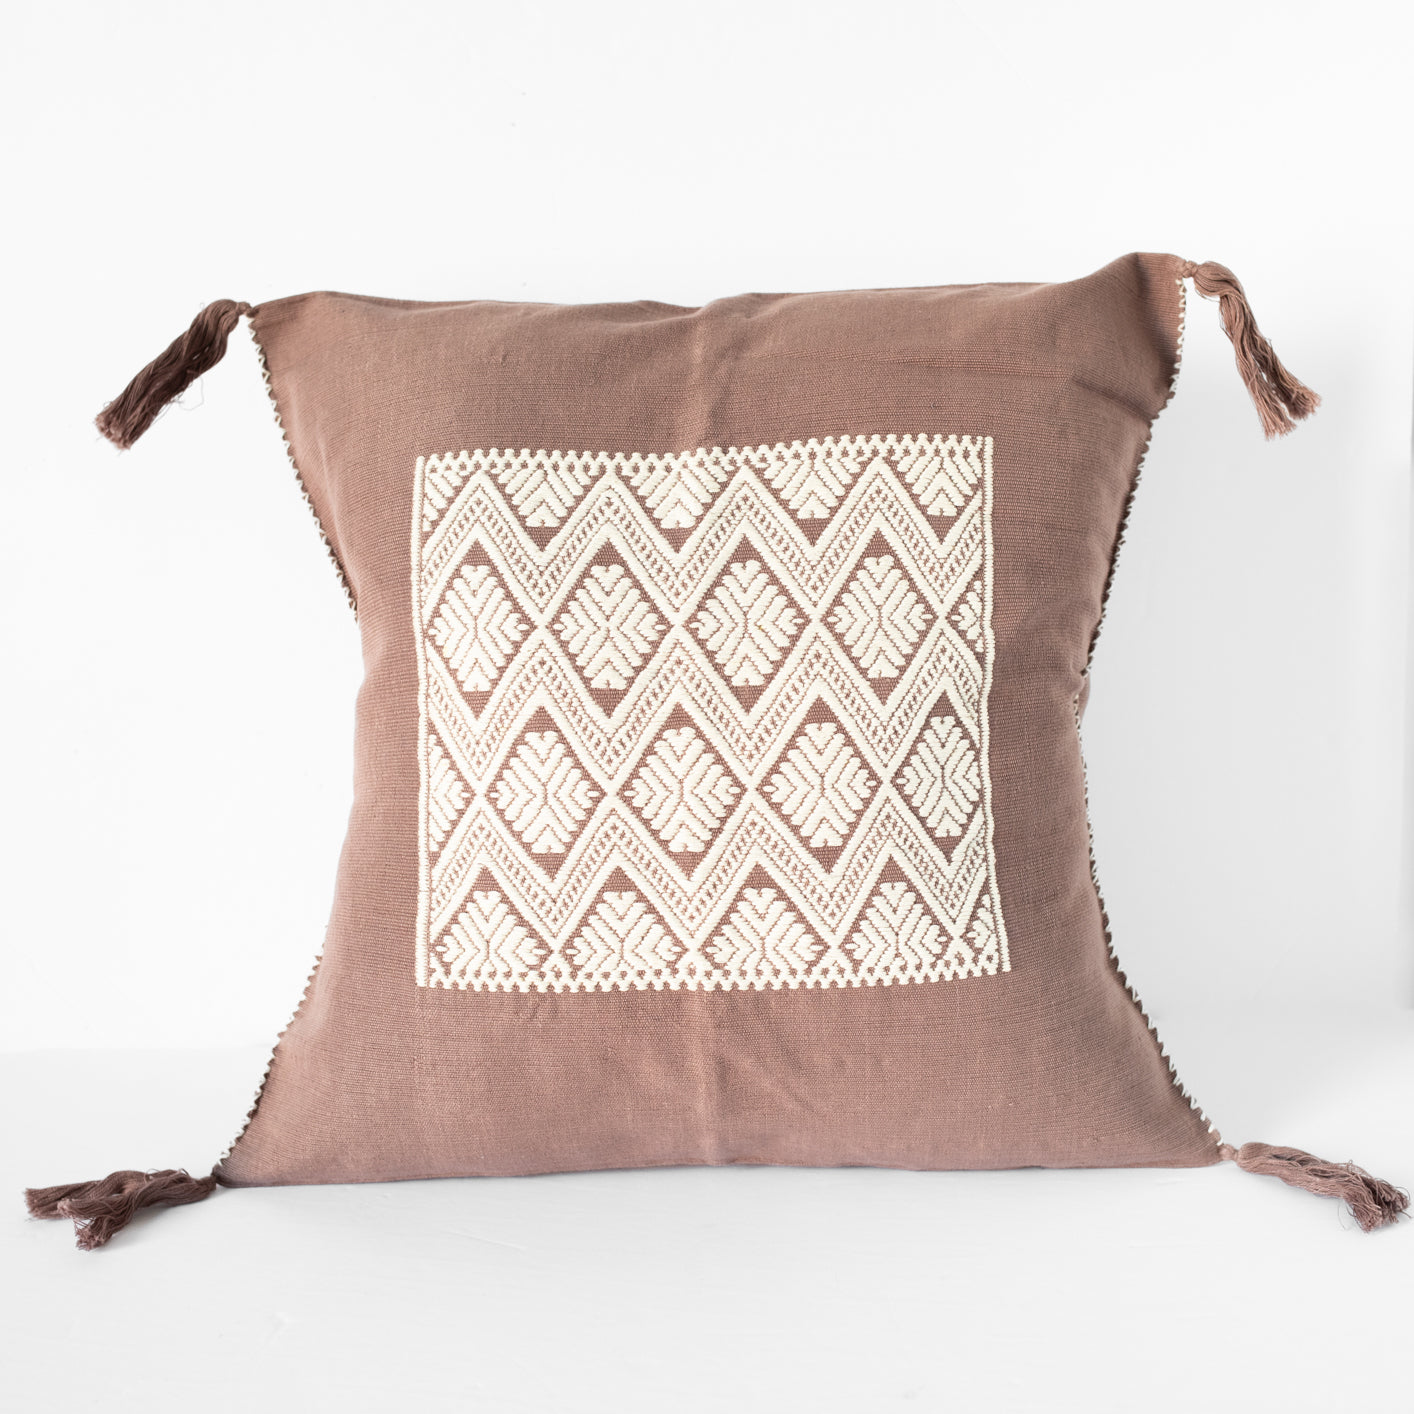 Mexican Cushion Covers - Center Panel Embroidered Pillow Cases